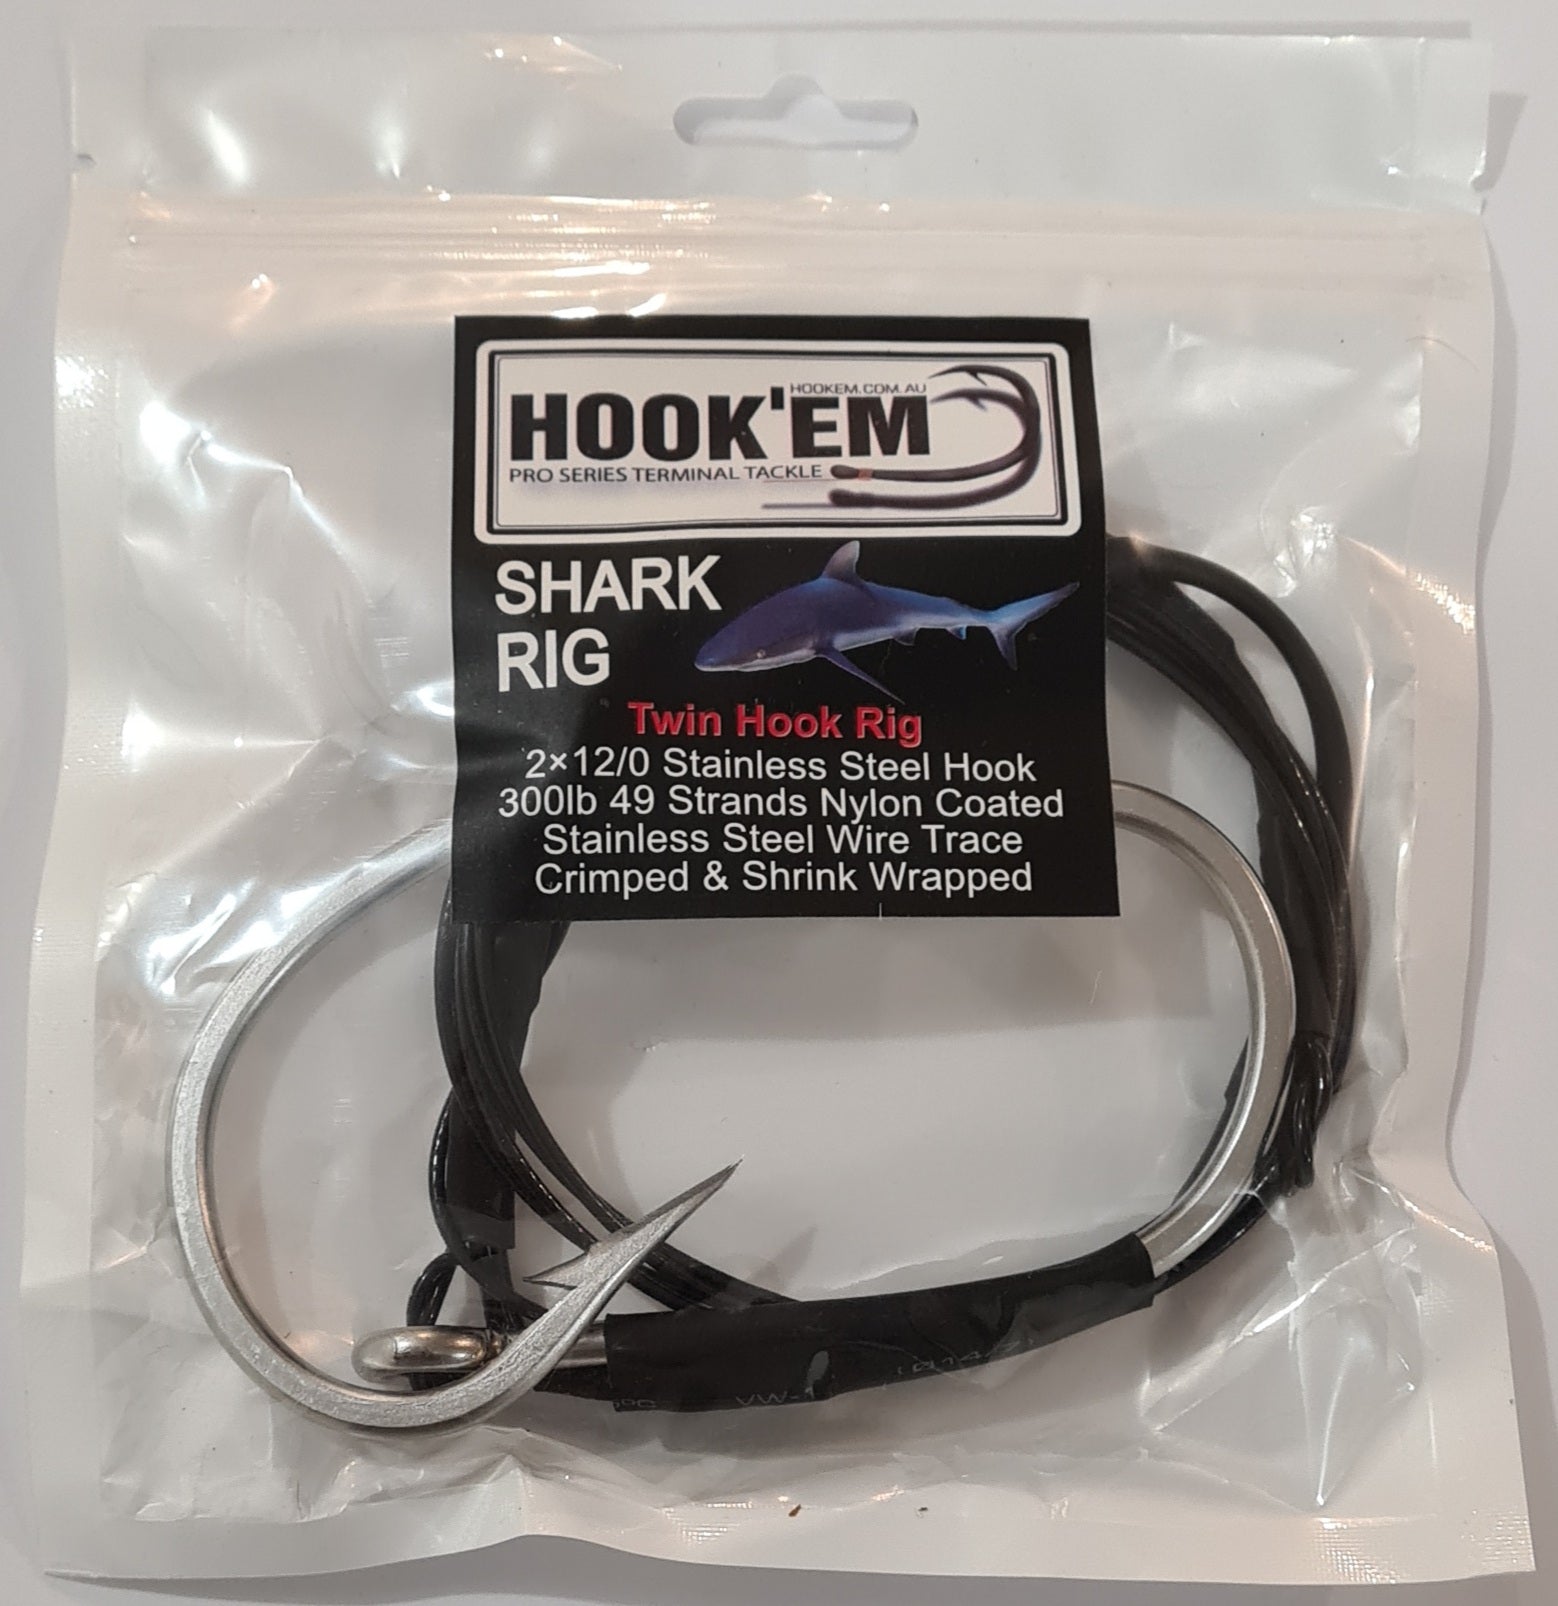 Shark Hook Fishing Rigs, Fishing Stainless Steel Fishing Hooks 400lb Nylon  Coated Cable Leader Rigging, Hand-tied Crimped, Saltwater Fishing Tackle